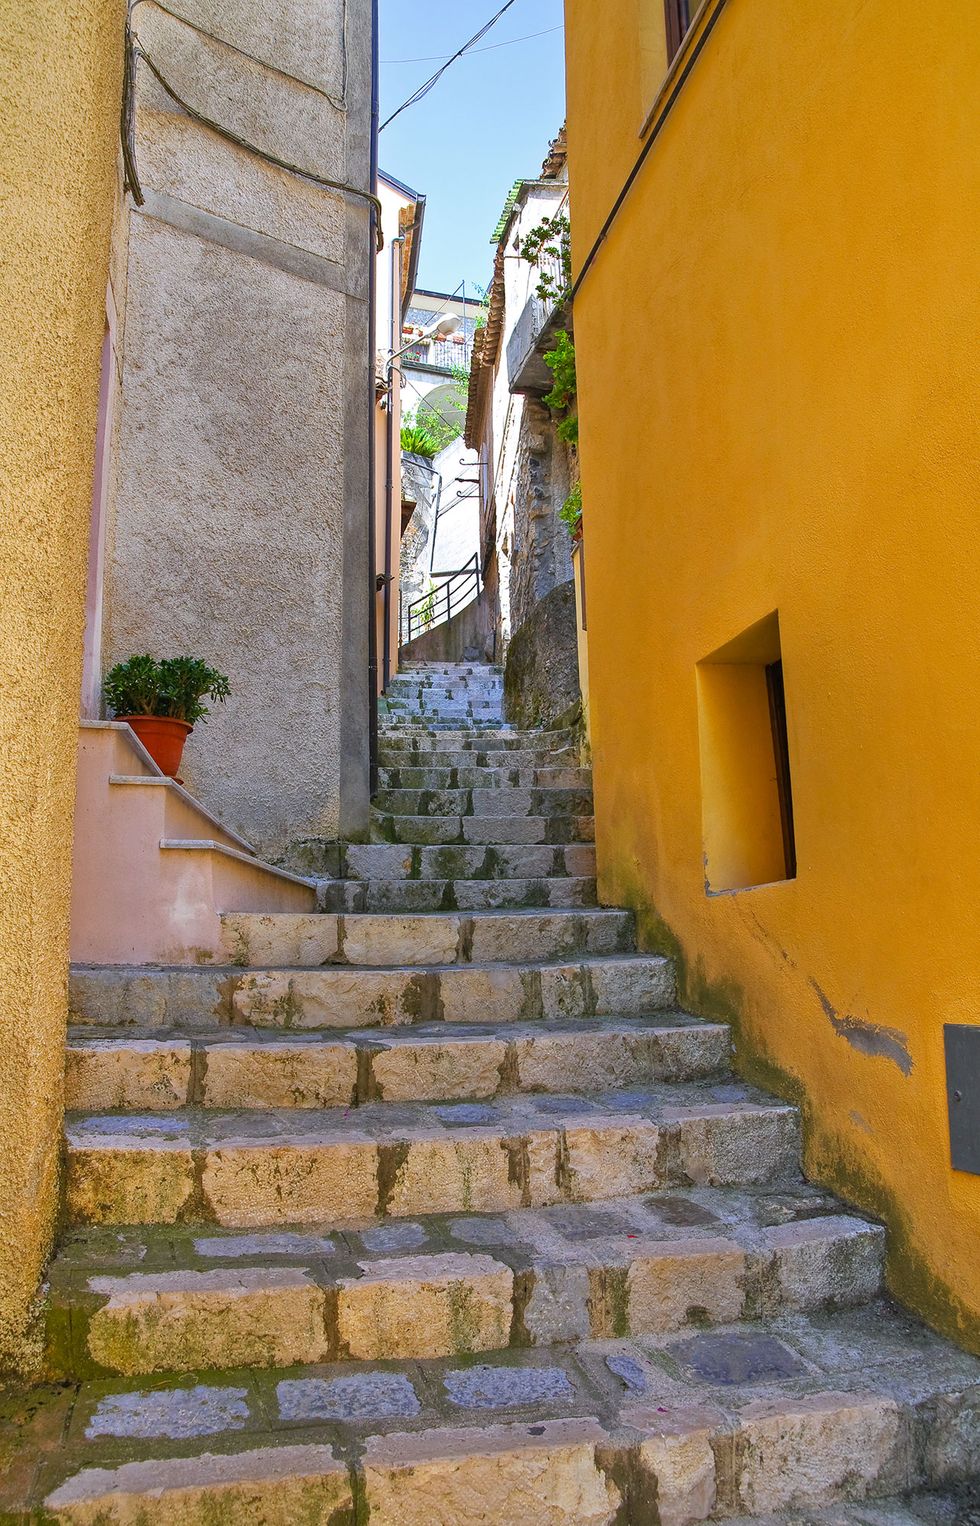 Alley, Street, Yellow, Cobblestone, Stairs, Road, Wall, Town, Infrastructure, Neighbourhood, 